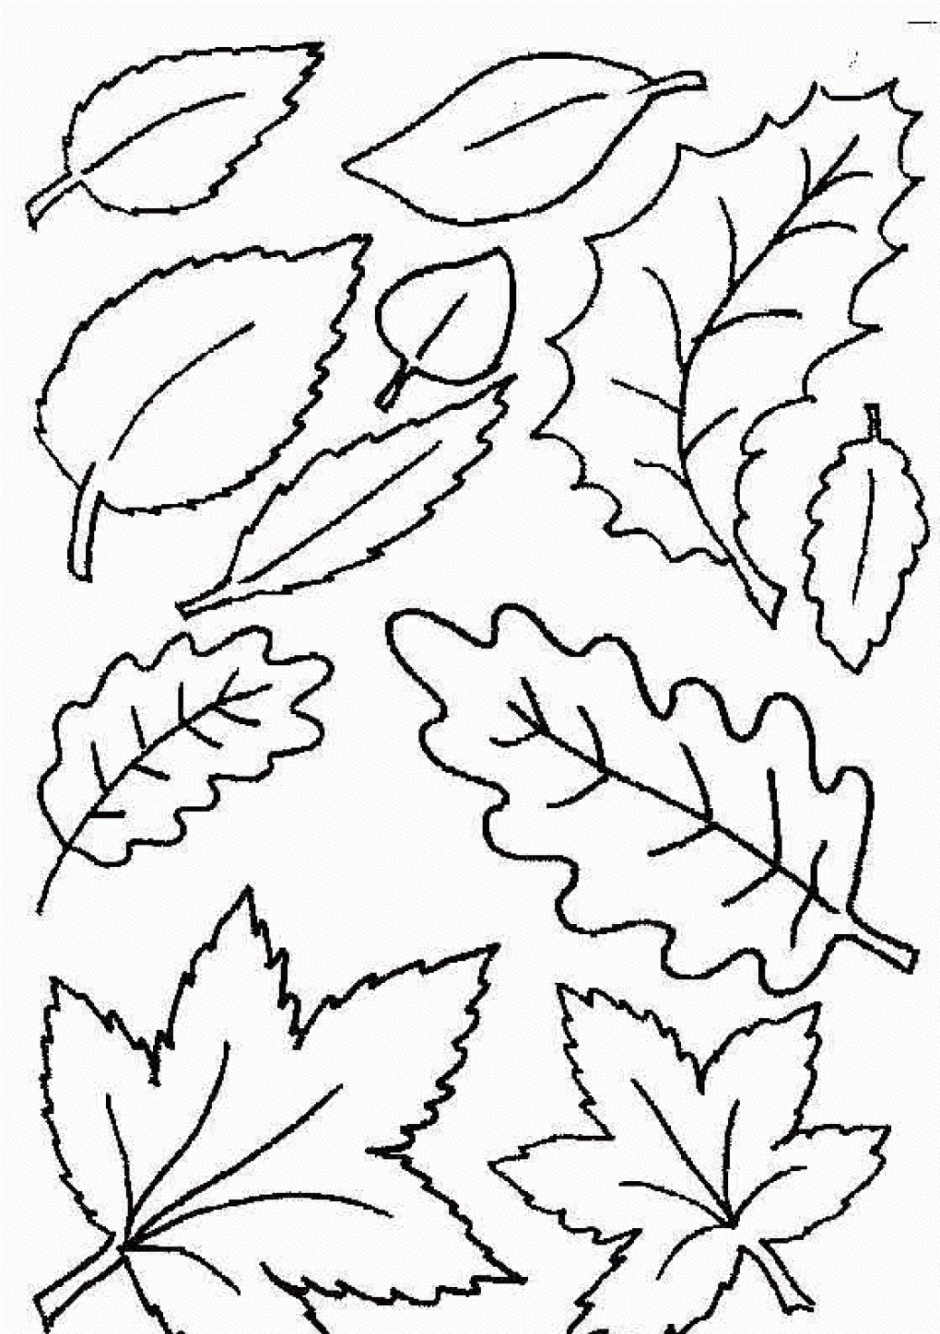 Coloring Ideas : Free Printable Leaf Coloring Pages Fall Leaves And - Free Printable Fall Leaves Coloring Pages